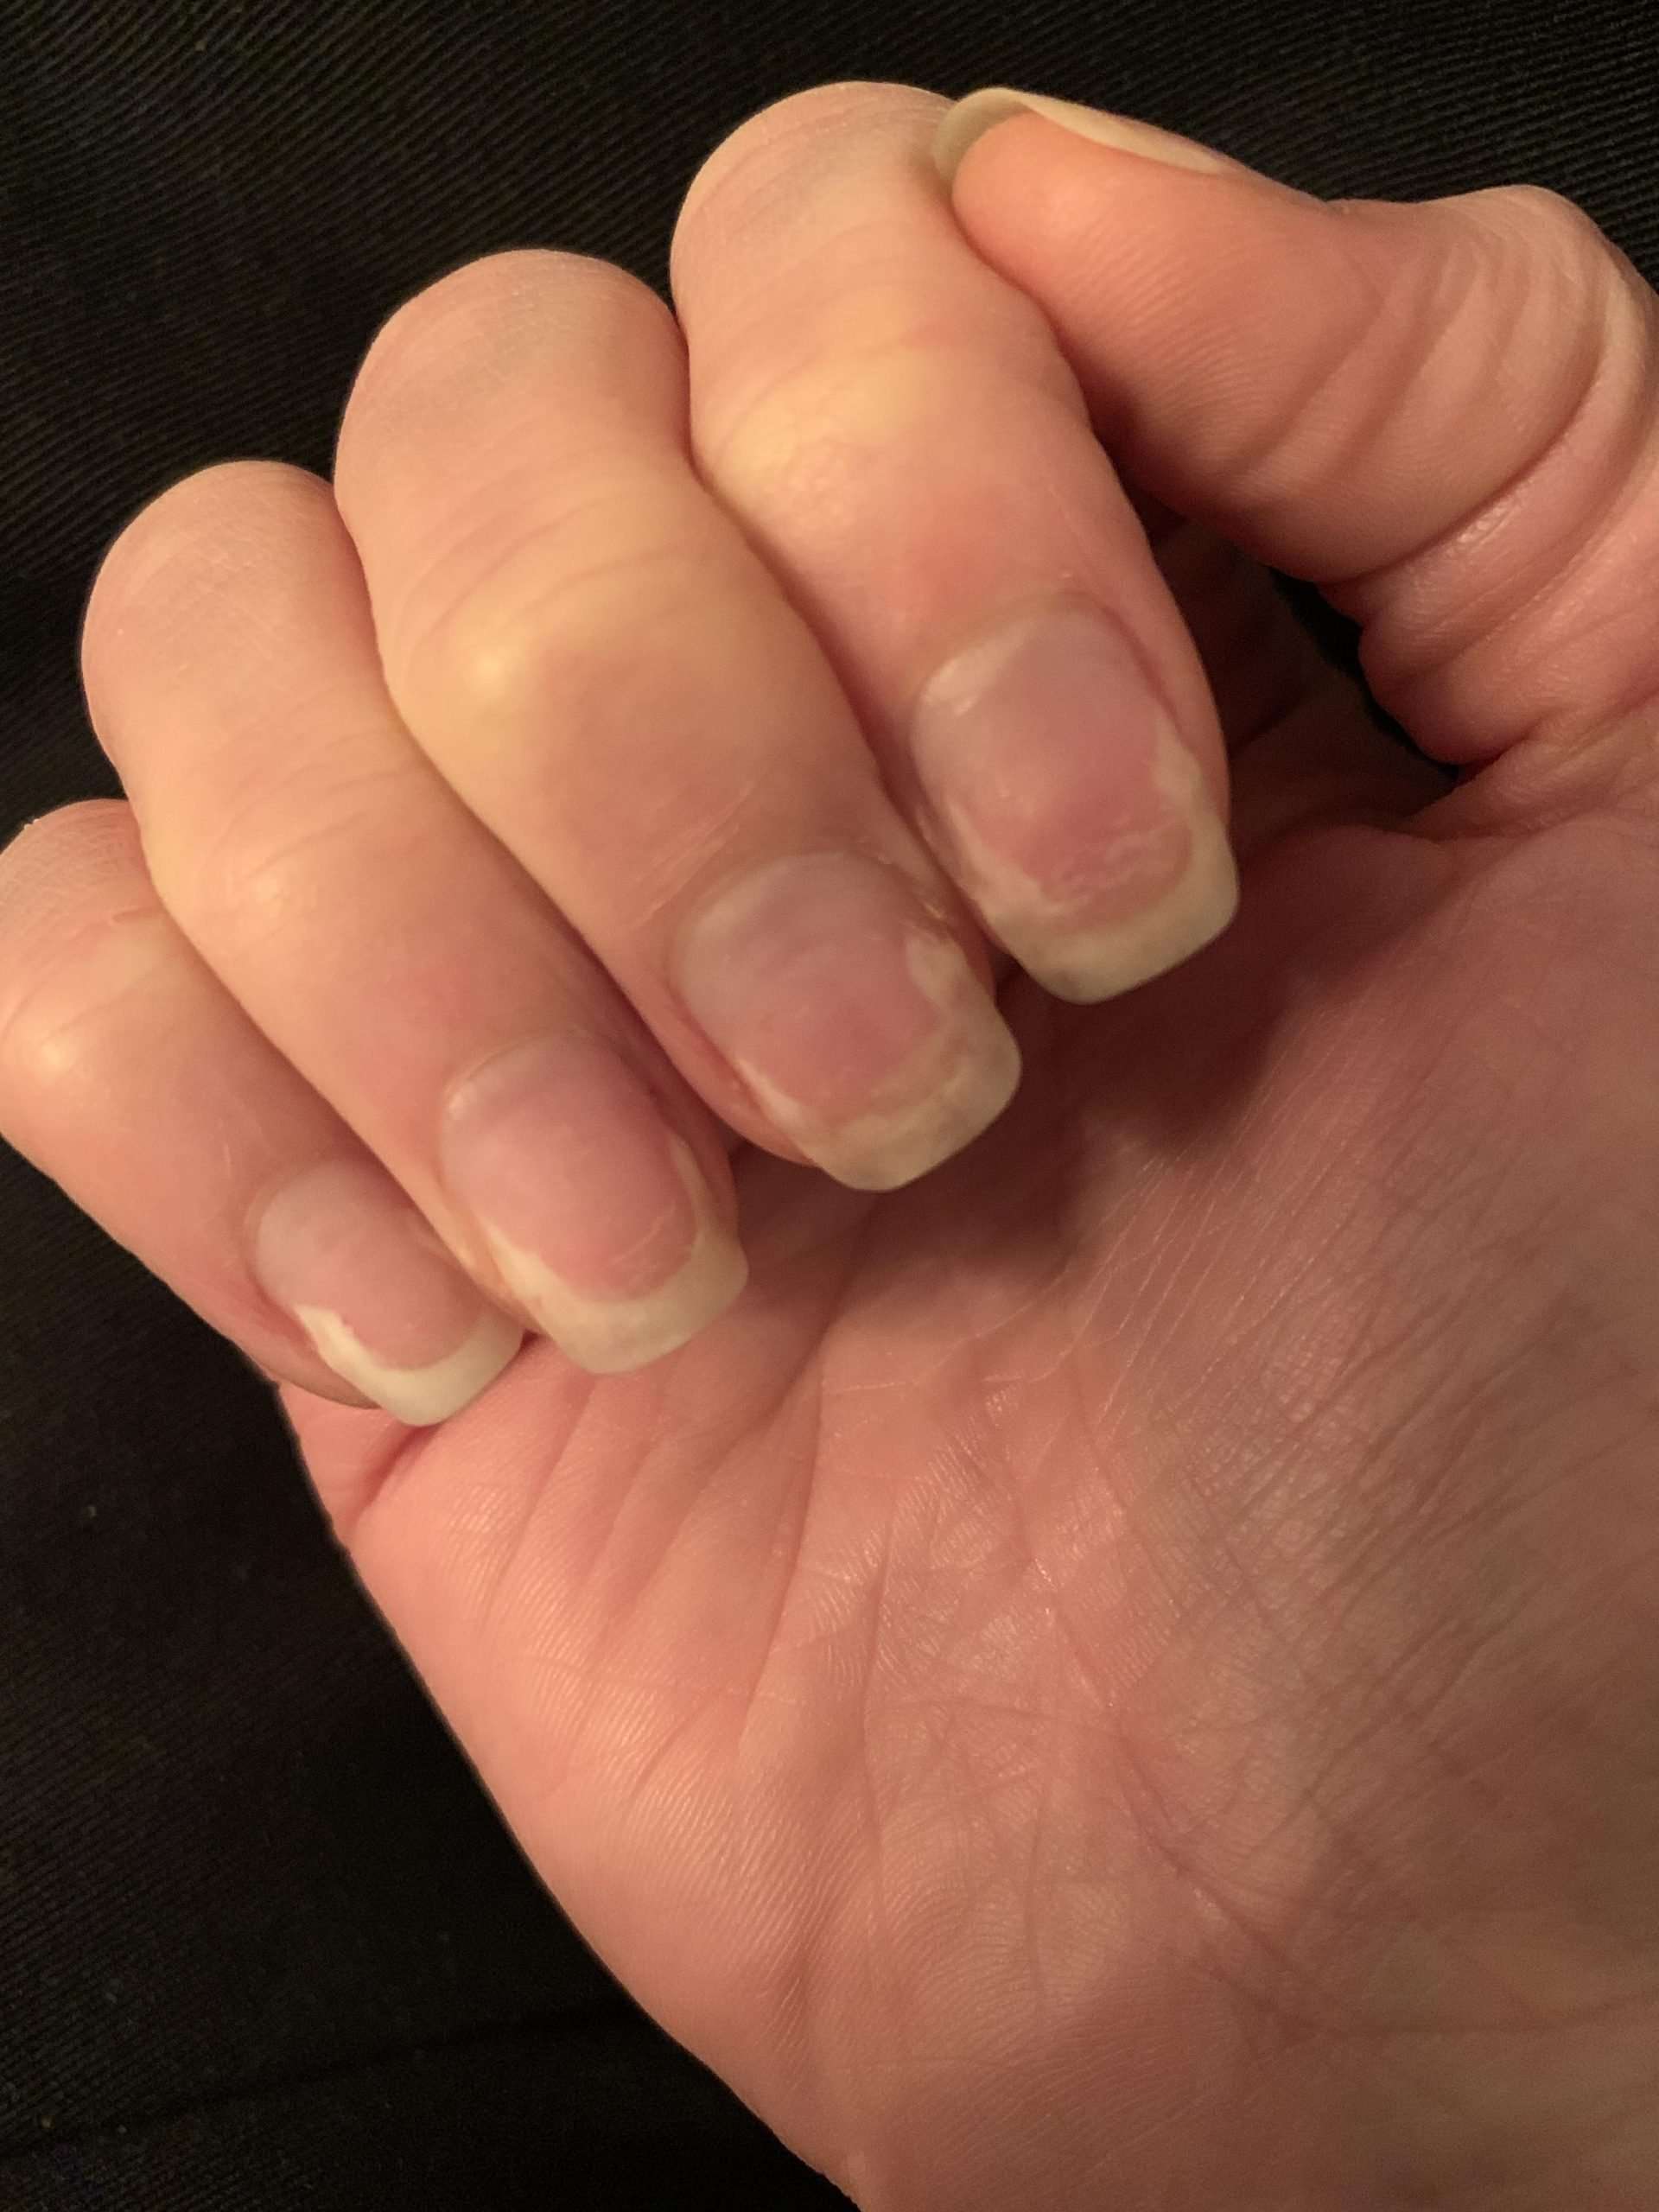 Has anyone else experienced nails like this after getting ...